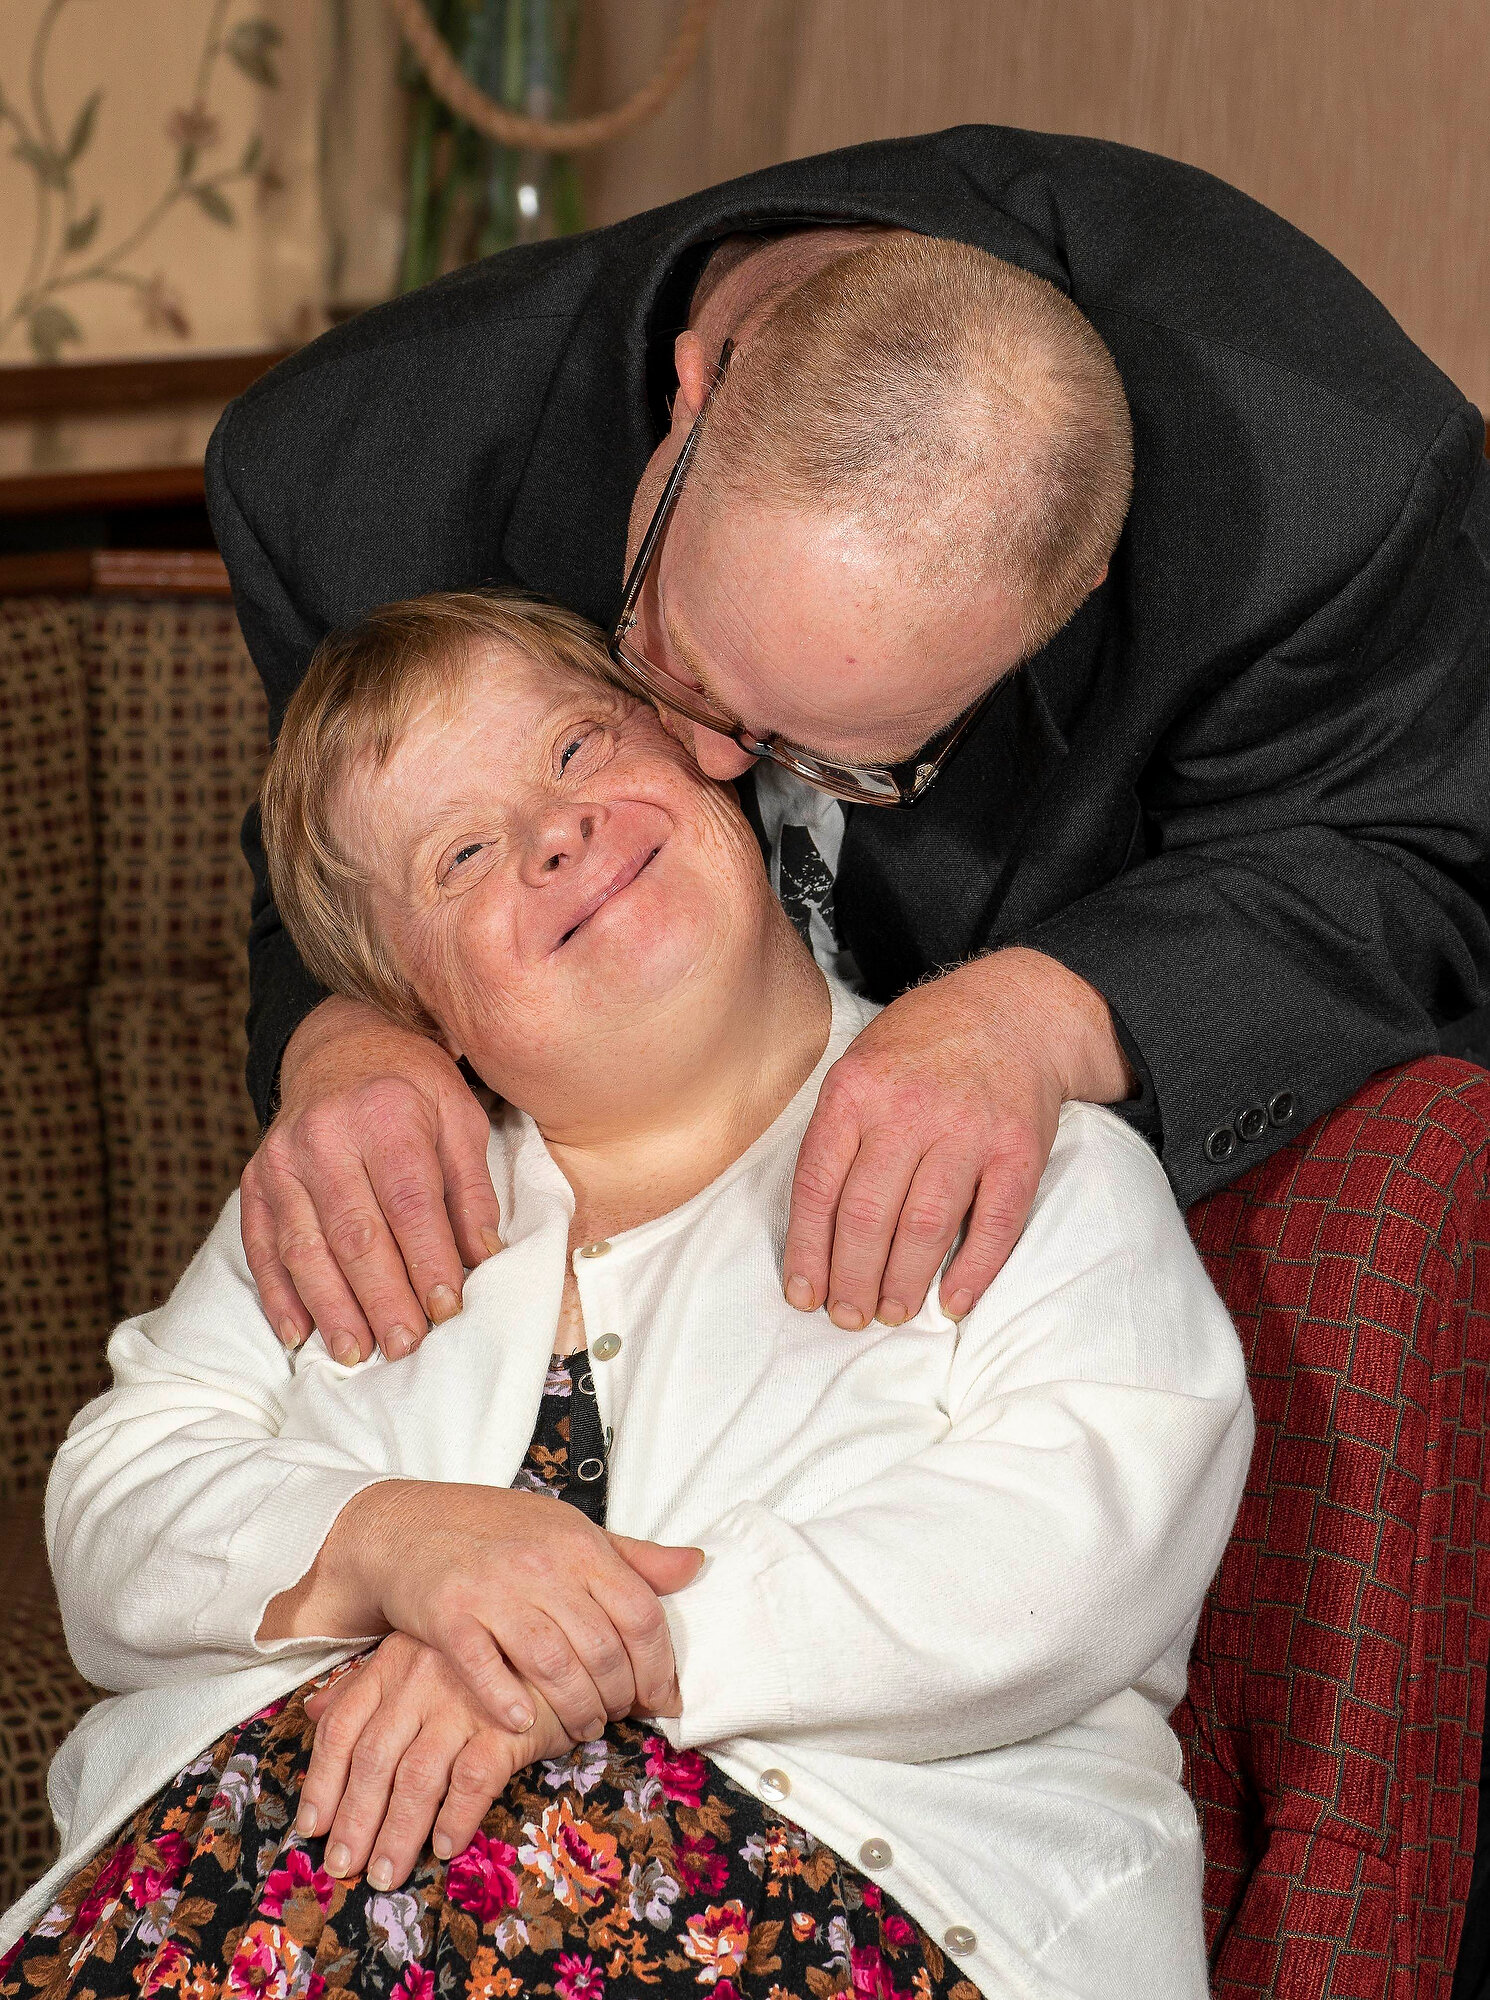  Deana Tobias enjoys a kiss from her husband Gareth. The couple have been married for 28 years and are the world’s longest married downs syndrome couple. Photo: Richard Rayner, 26 August 2020 